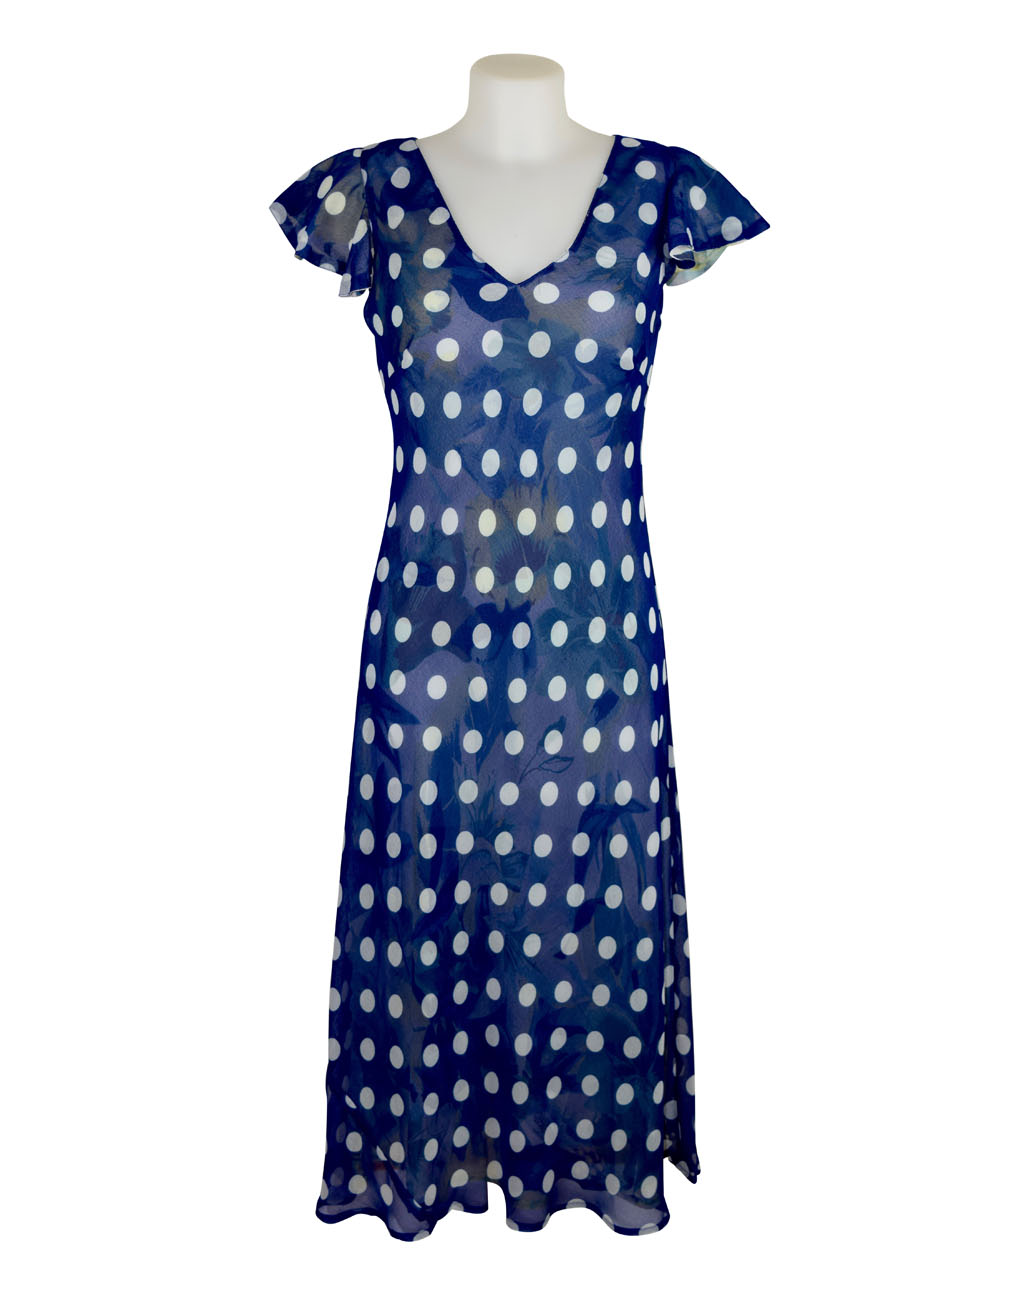 Paramour Reversible 2 In 1 Capped Sleeve Dress Navy & White Polka Dot / Floral A